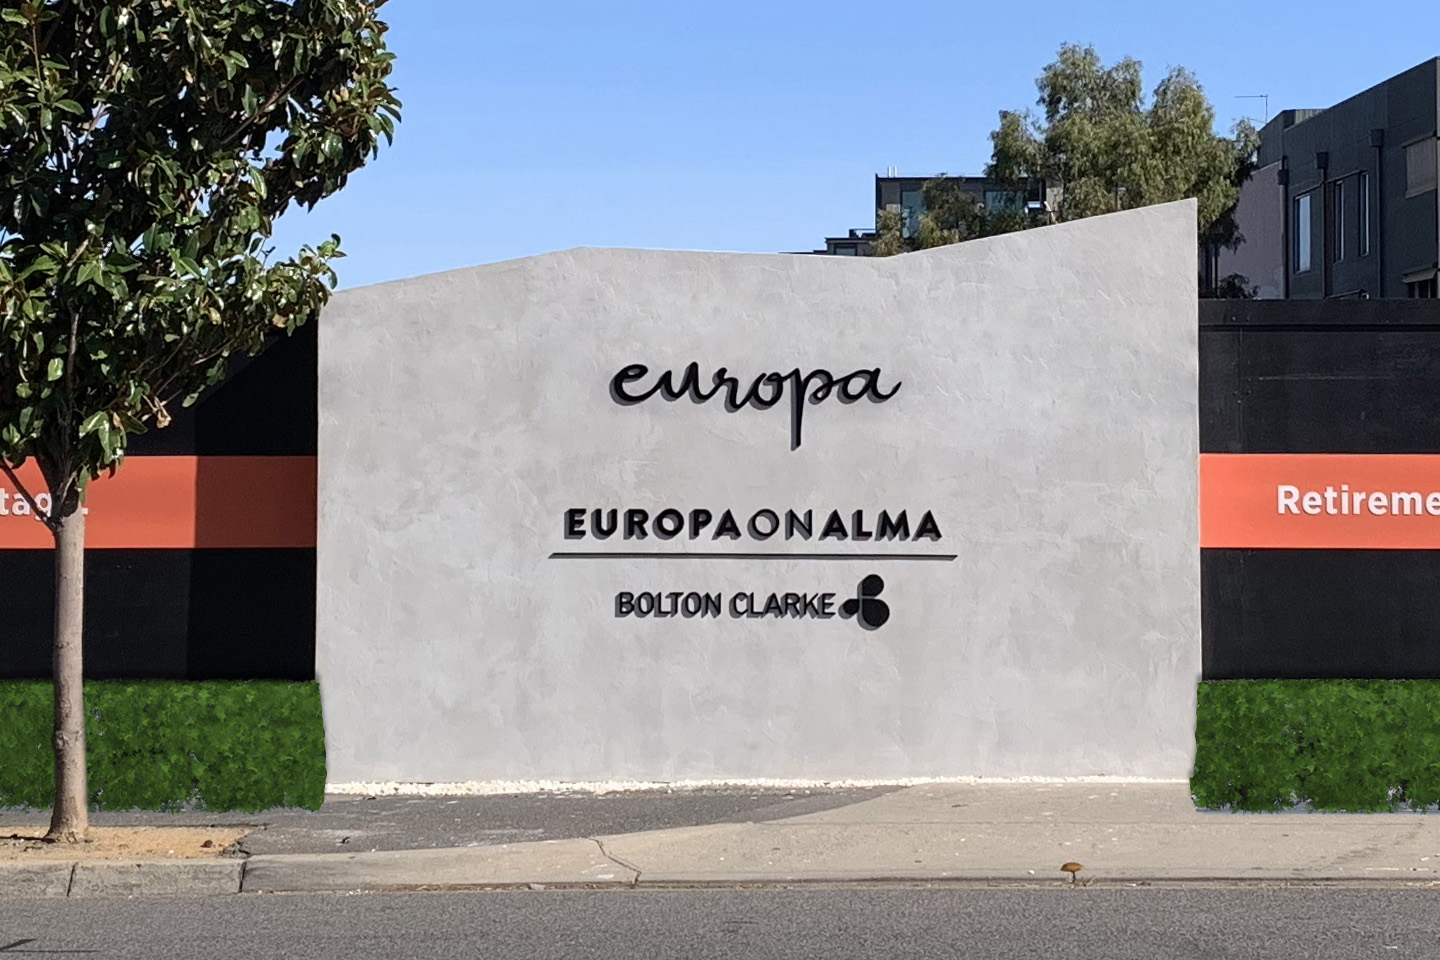 One Fell Swoop - Europa on Alma signage